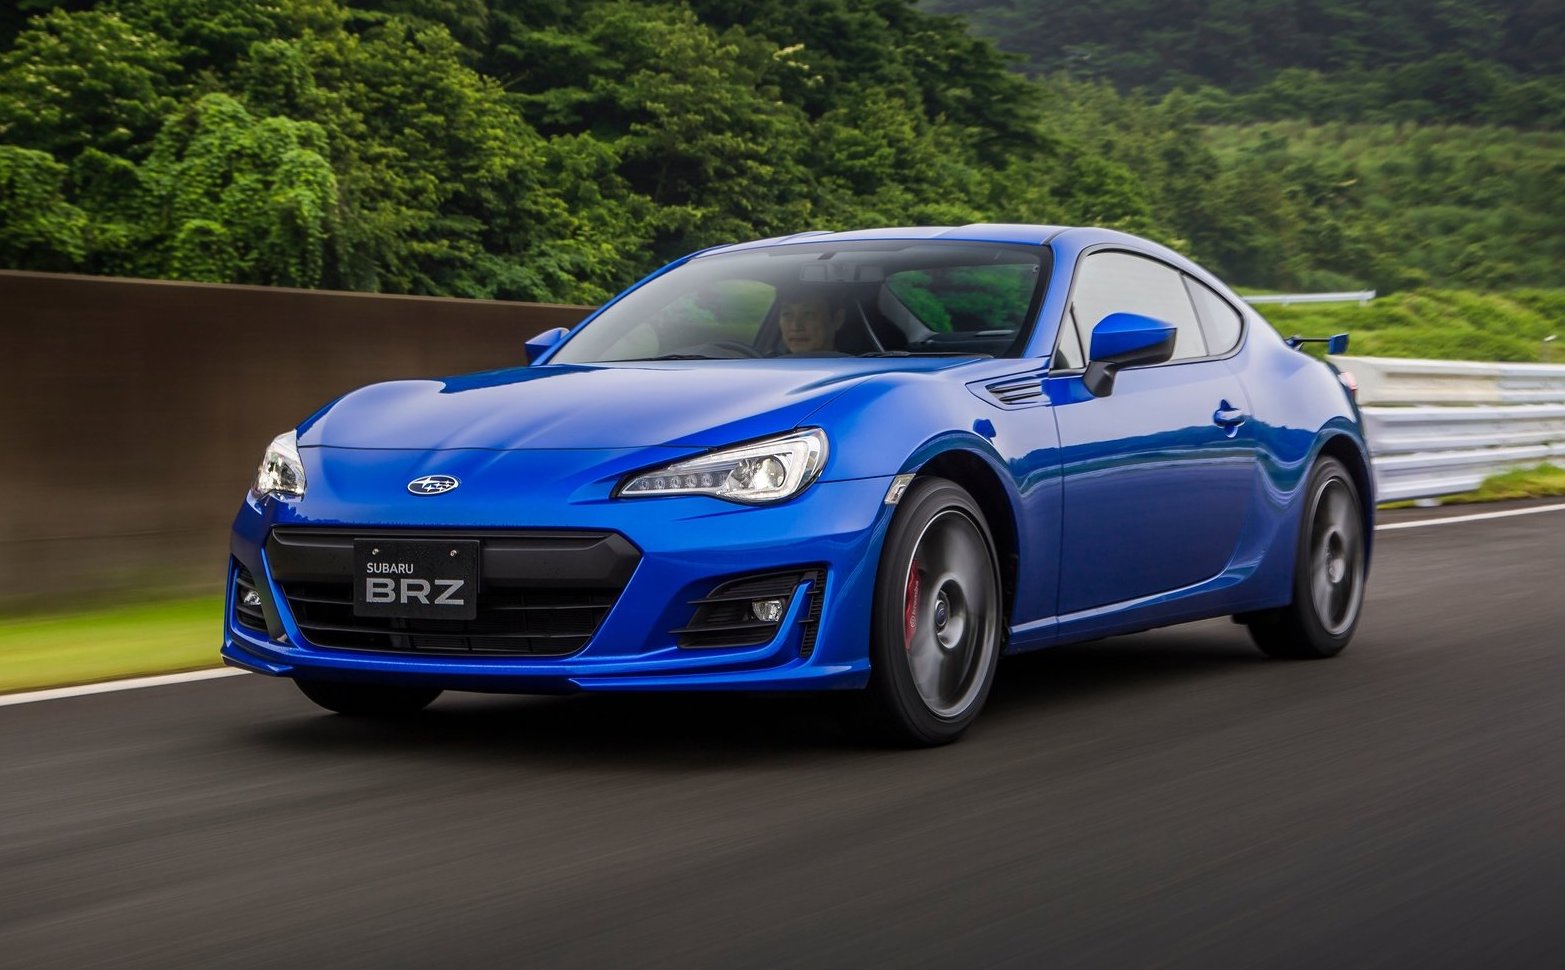 2021 Subaru Brz Toyota 86 To Use 2 4l Concept Coming Soon